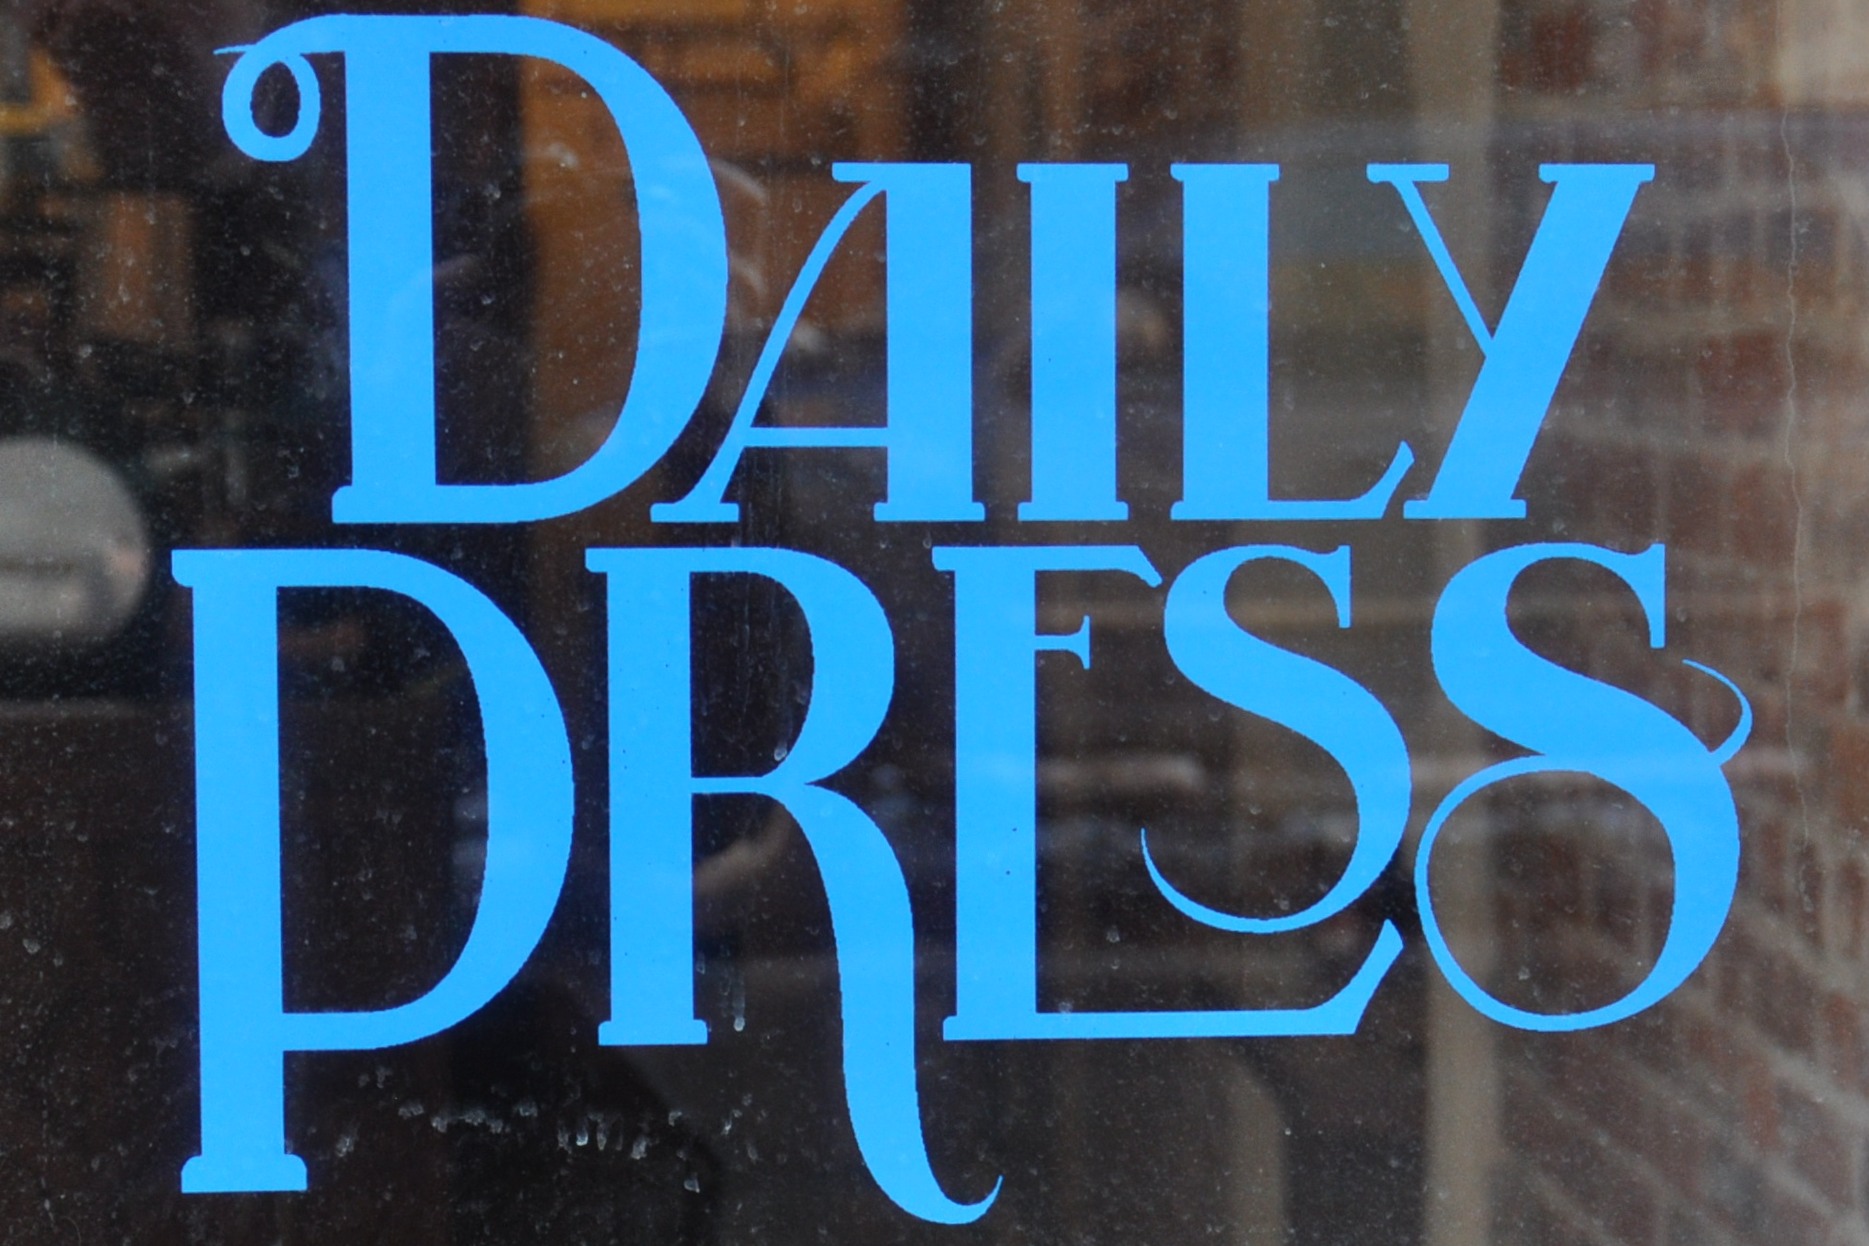 From the window of Daily Press Coffee: the words "Daily Press" written in blue in serif capitals.